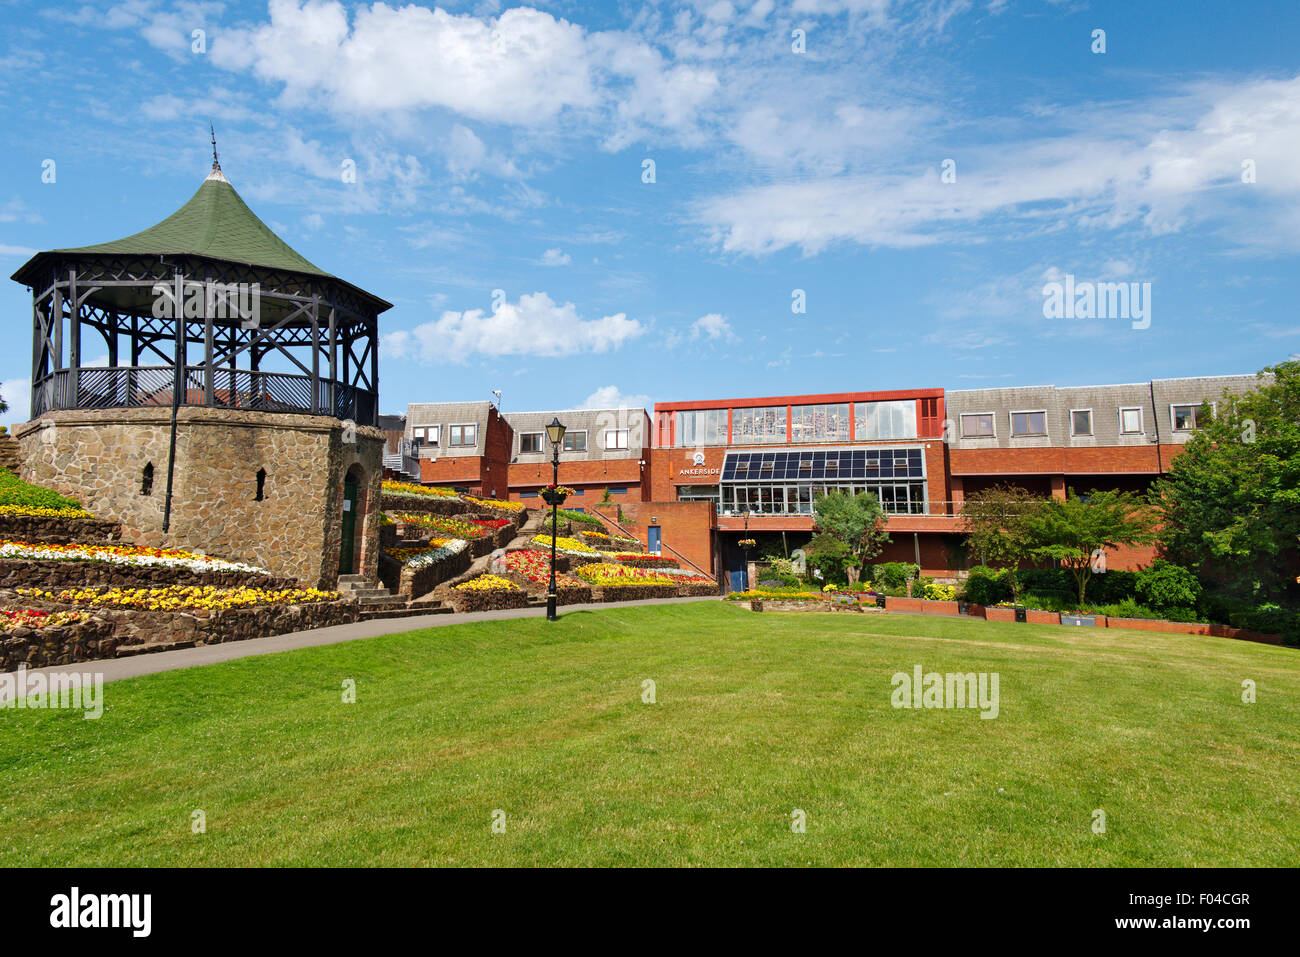 Ankerside Shopping Centre and Castle Park gardens with bandstand, Tamworth, Staffordshire Stock Photo